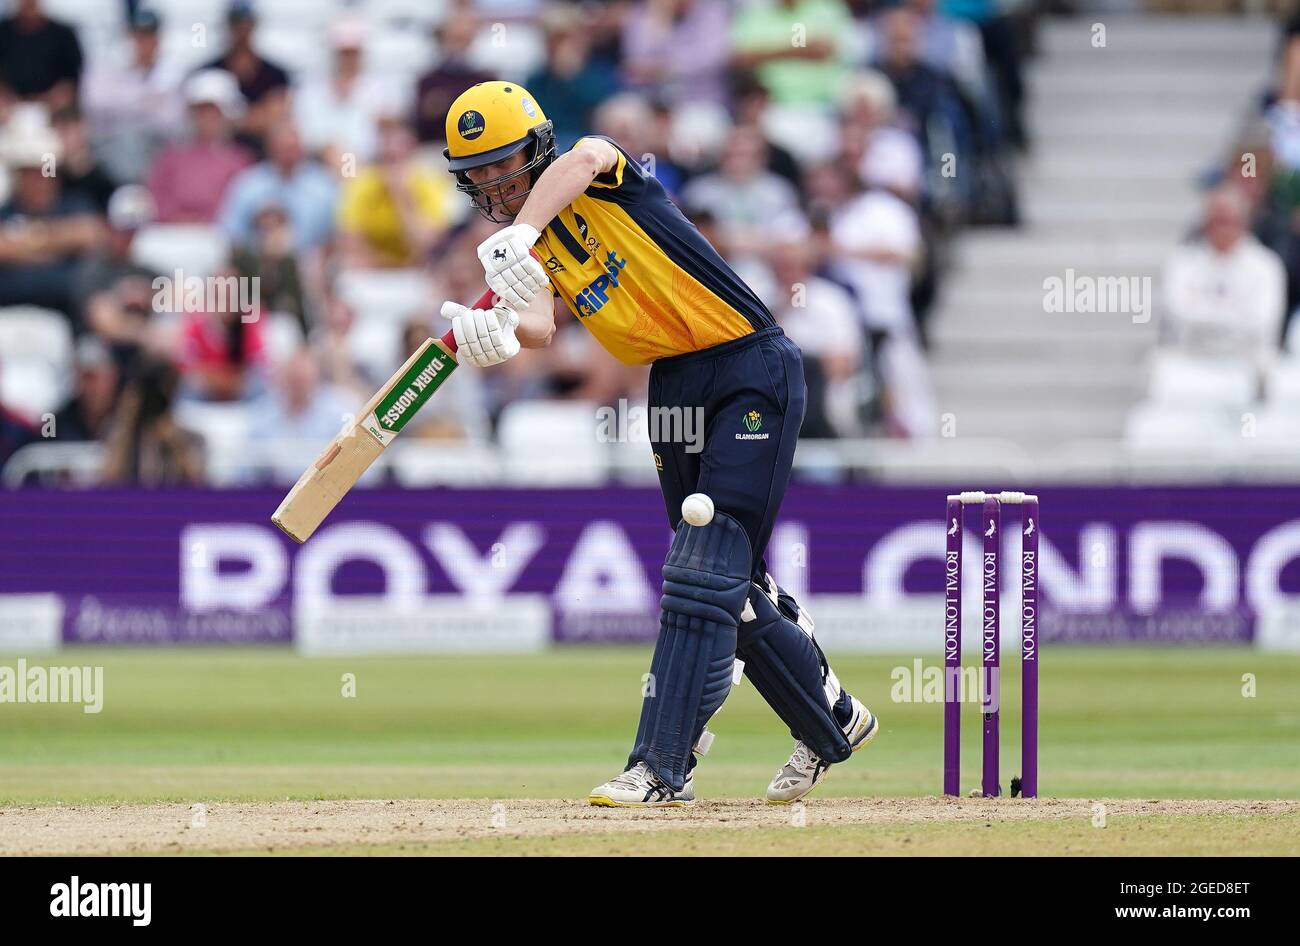 Glamorgan's Nick Selman batting during the Royal London One-Day Cup Final at Trent Bridge, Nottingham. Picture date: Thursday August 19, 2021. See PA story CRICKET Final. Photo credit should read: Zac Goodwin/PA Wire. RESTRICTIONS: No commercial use without prior written consent of the ECB. Still image use only. No moving images to emulate broadcast. Editorial use only. No removing or obscuring of sponsor logos. Stock Photo